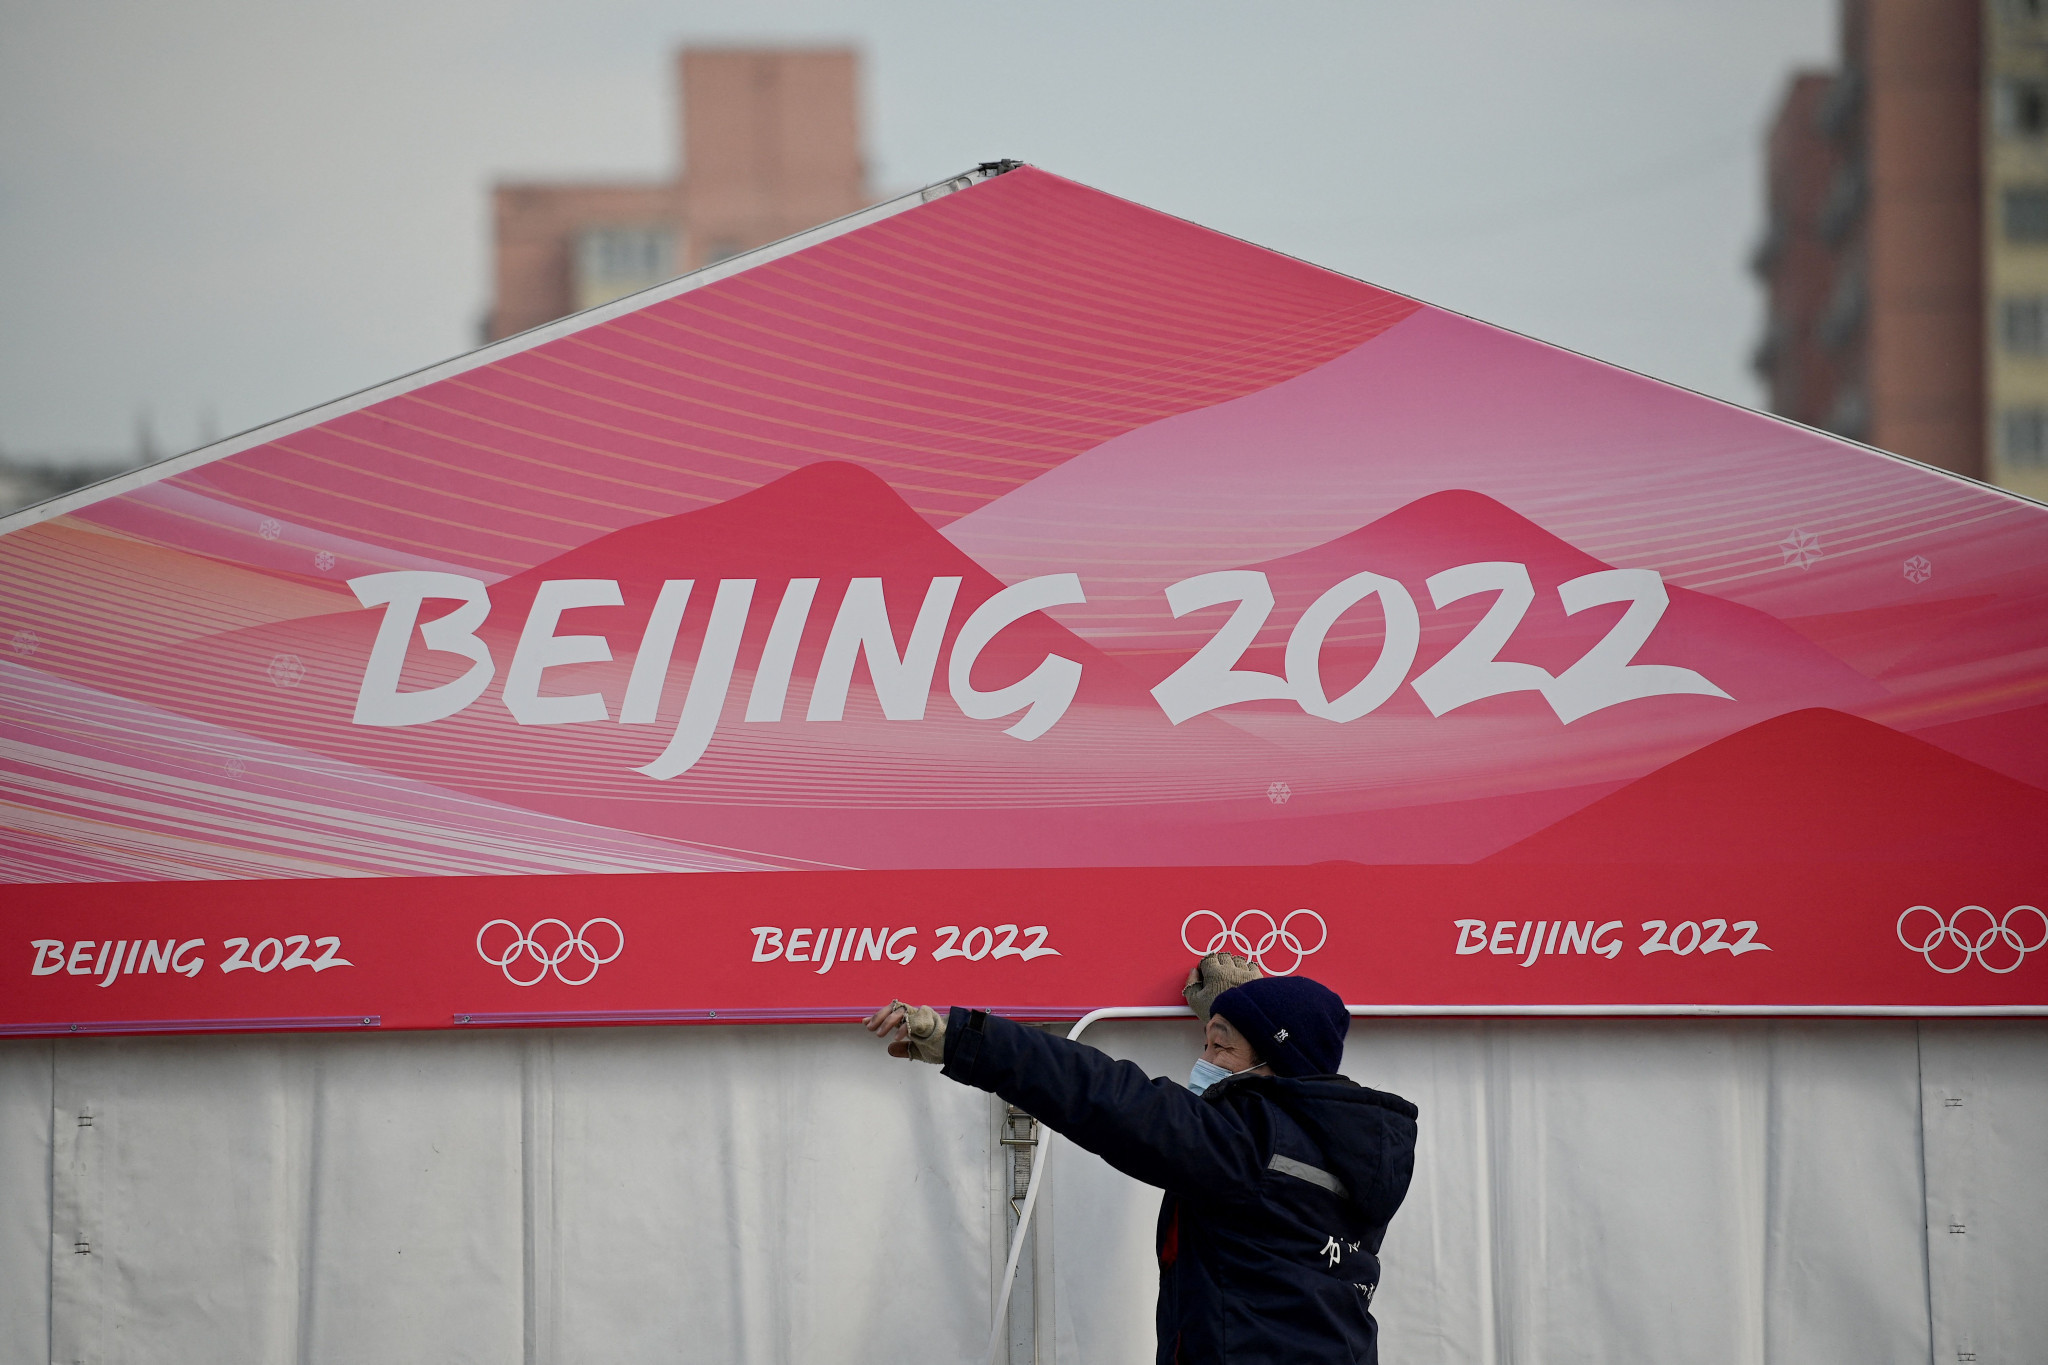 China has increased its COVID-19 countermeasures as it prepares to host the Winter Olympics and Paralympics ©Getty Images